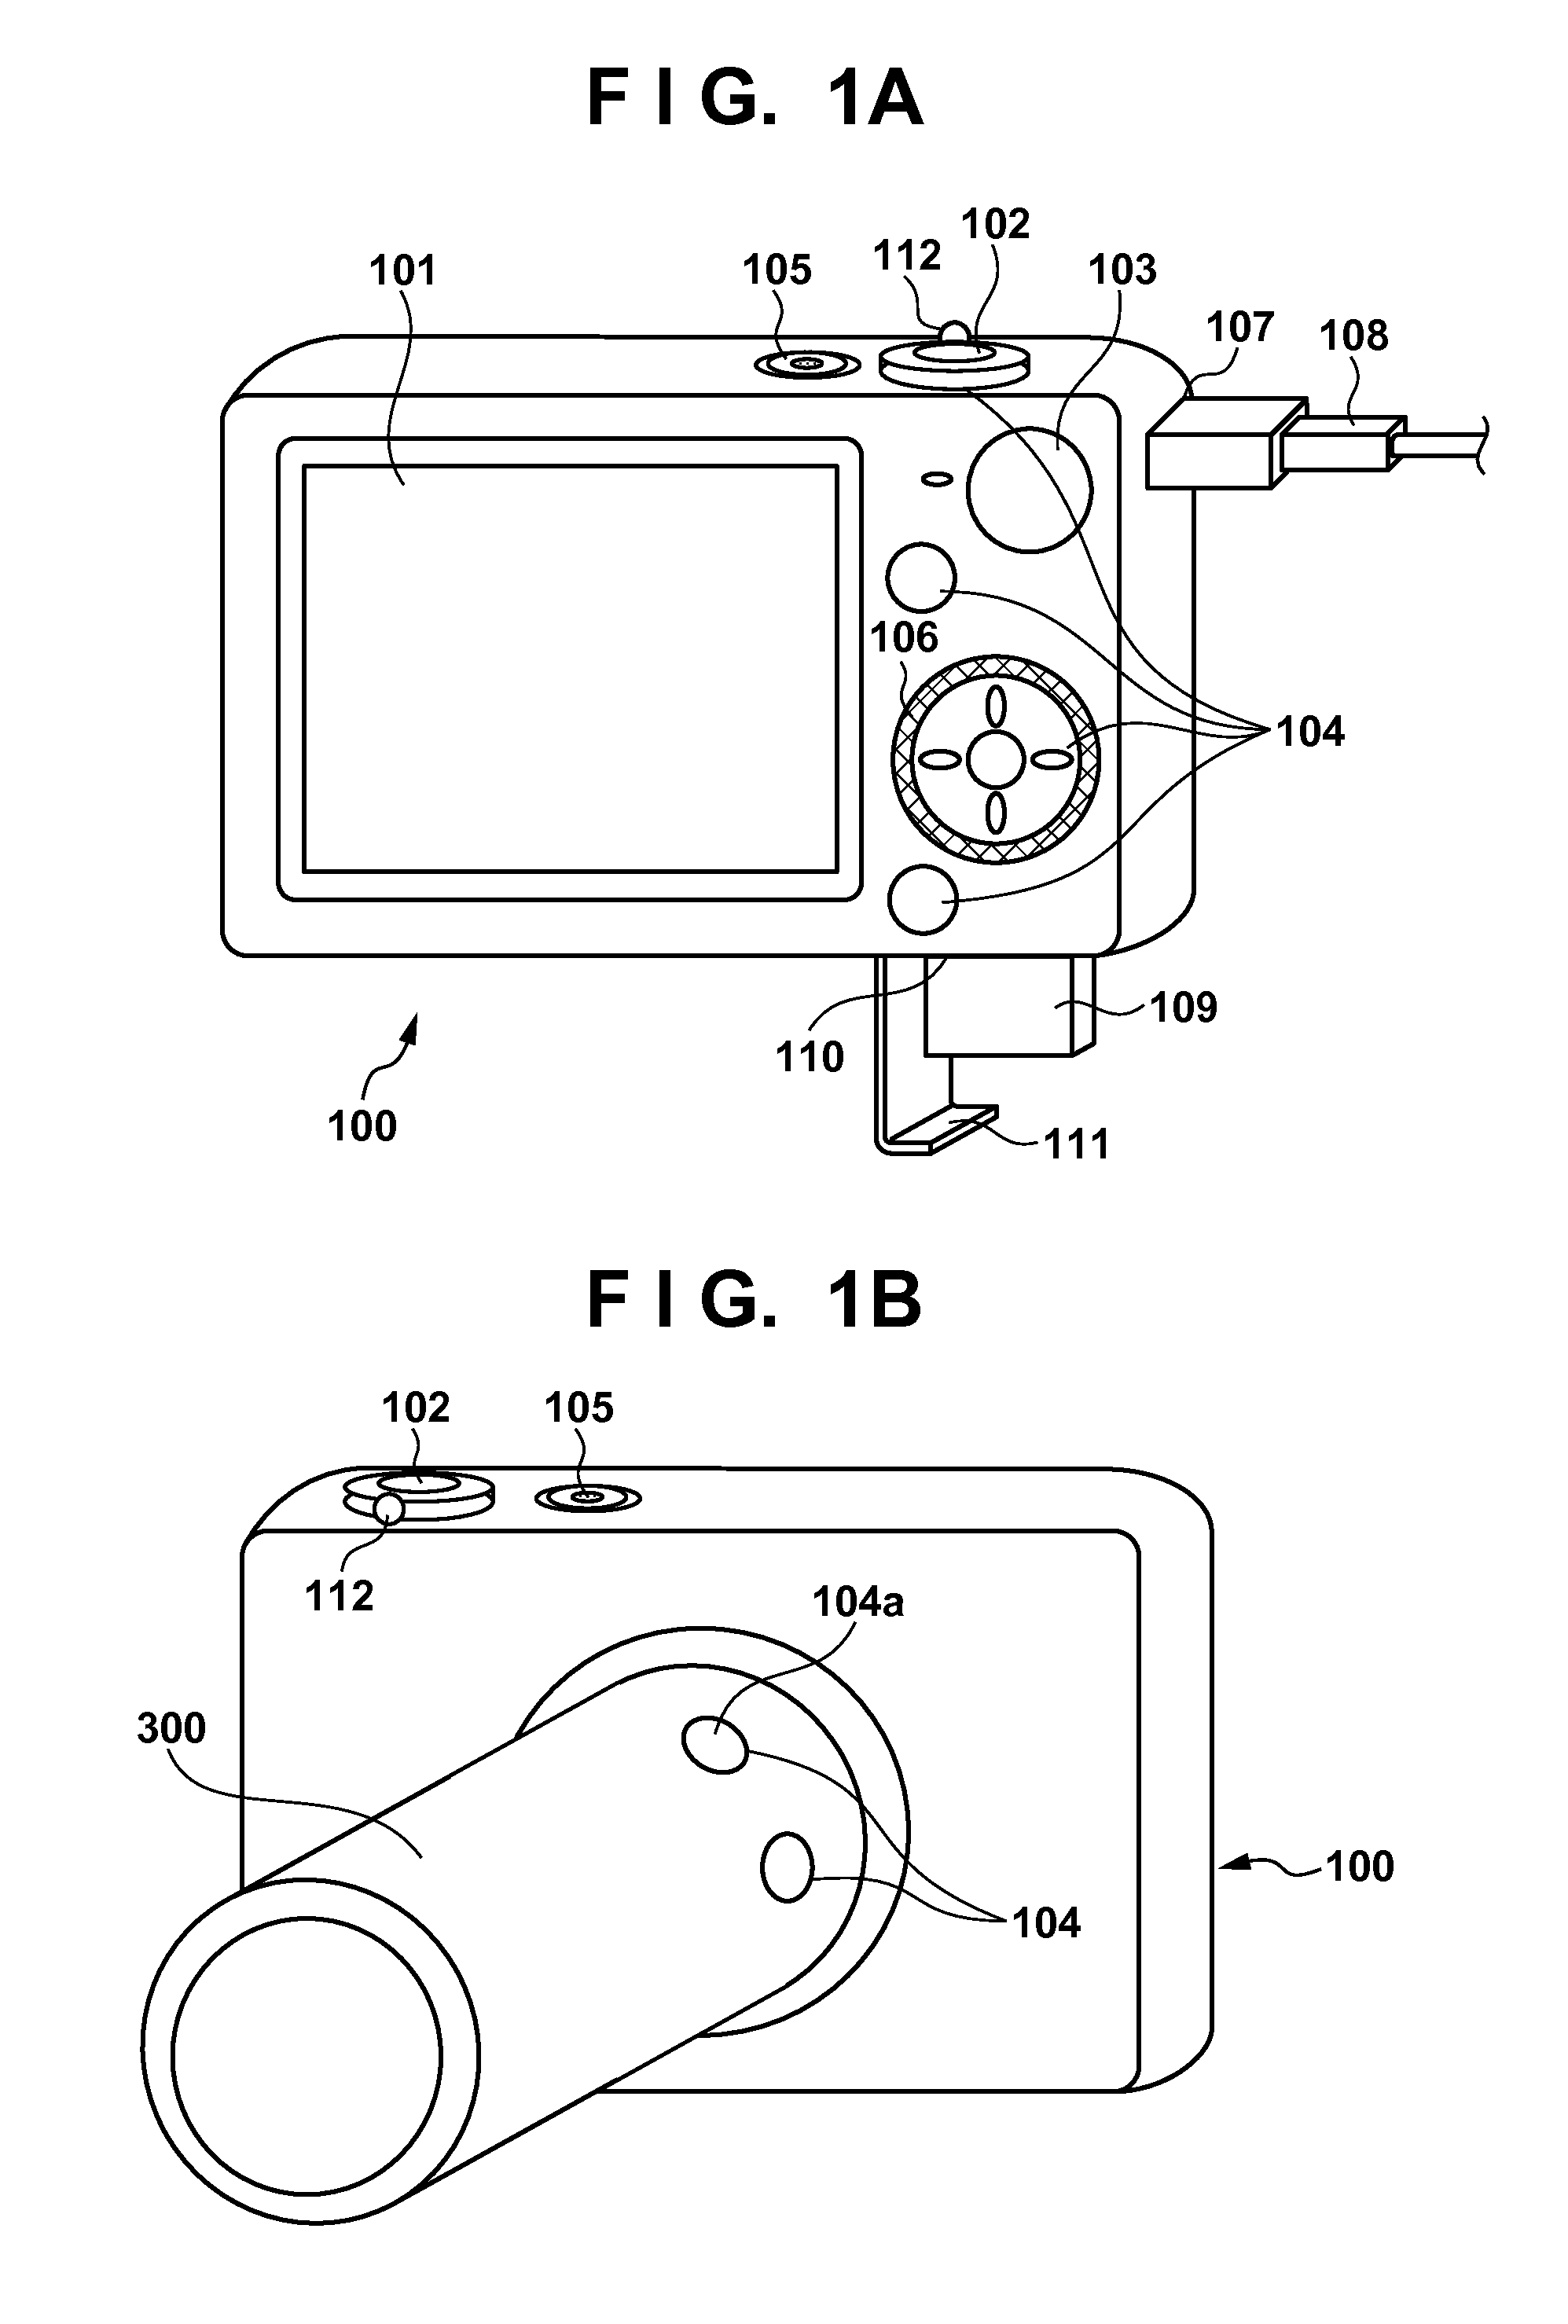 Image capturing apparatus, control apparatus and control method thereof